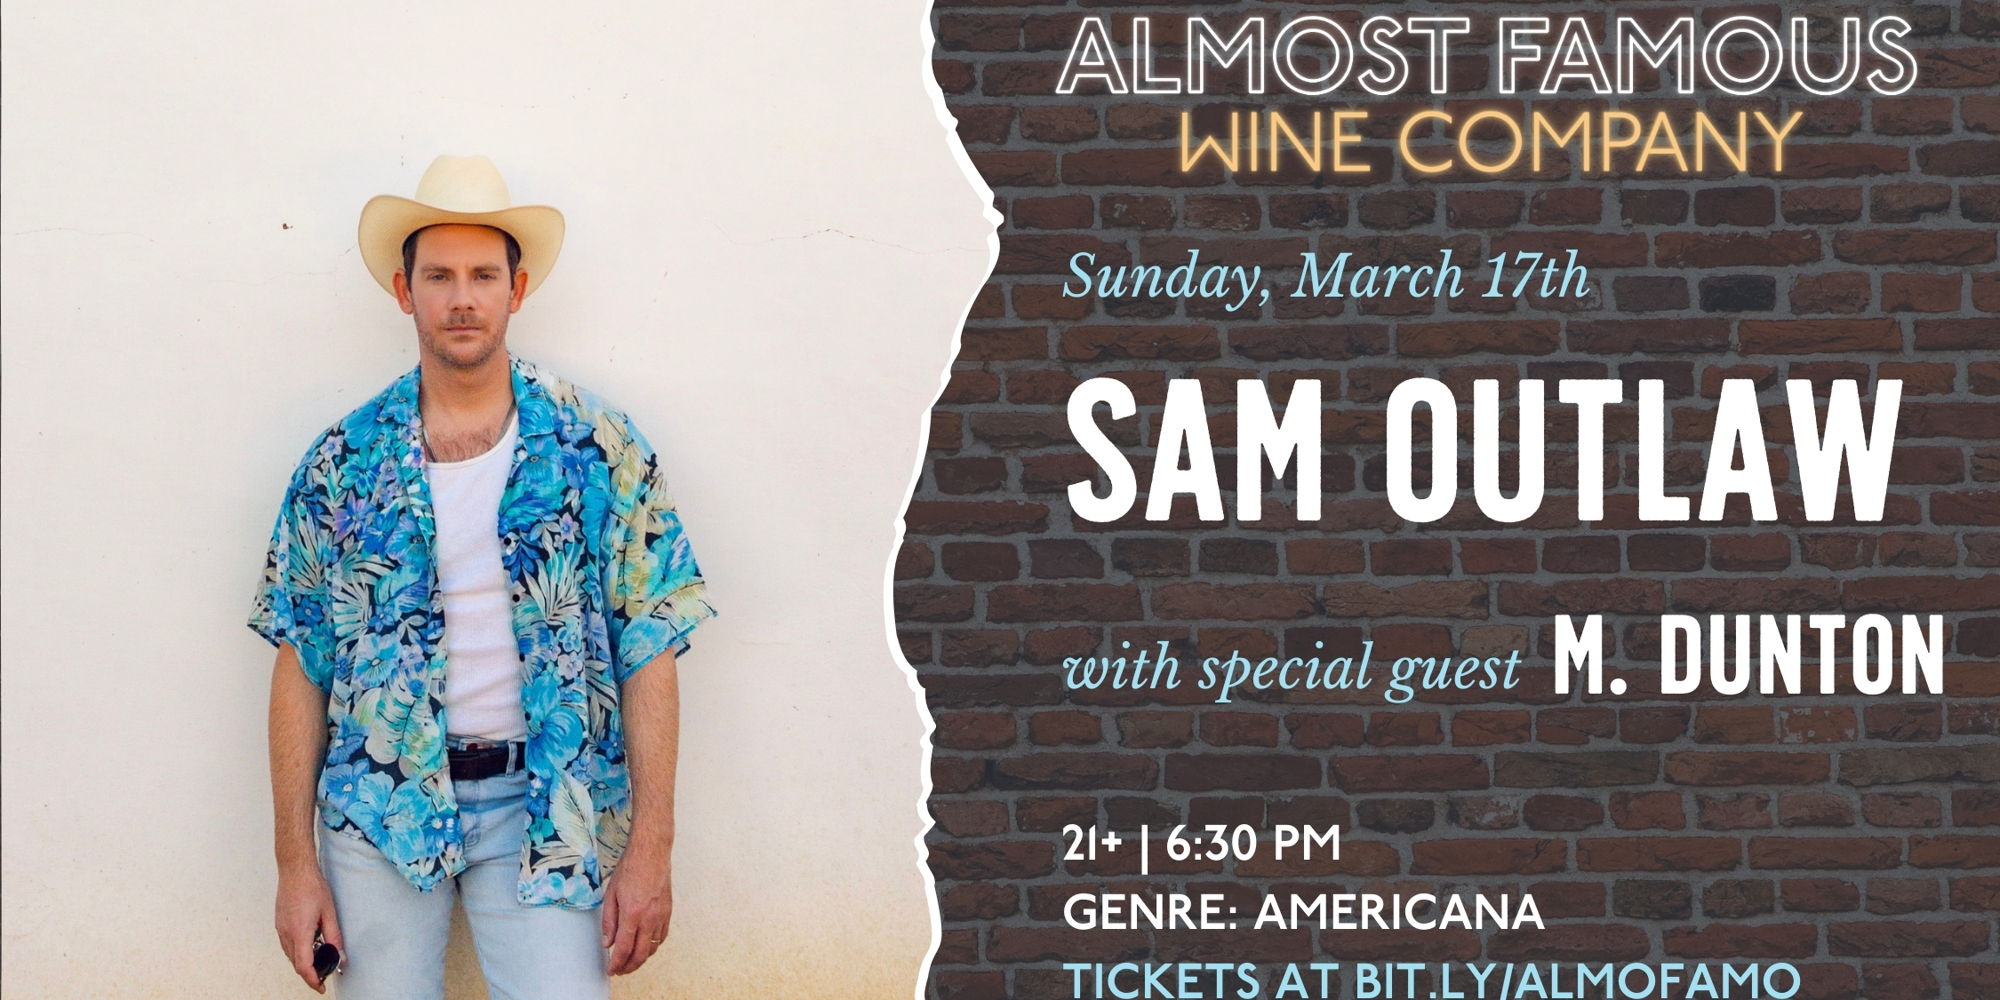 Sam Outlaw: "So Cal Country" and Americana, with acoustic special guest M. Dunton promotional image